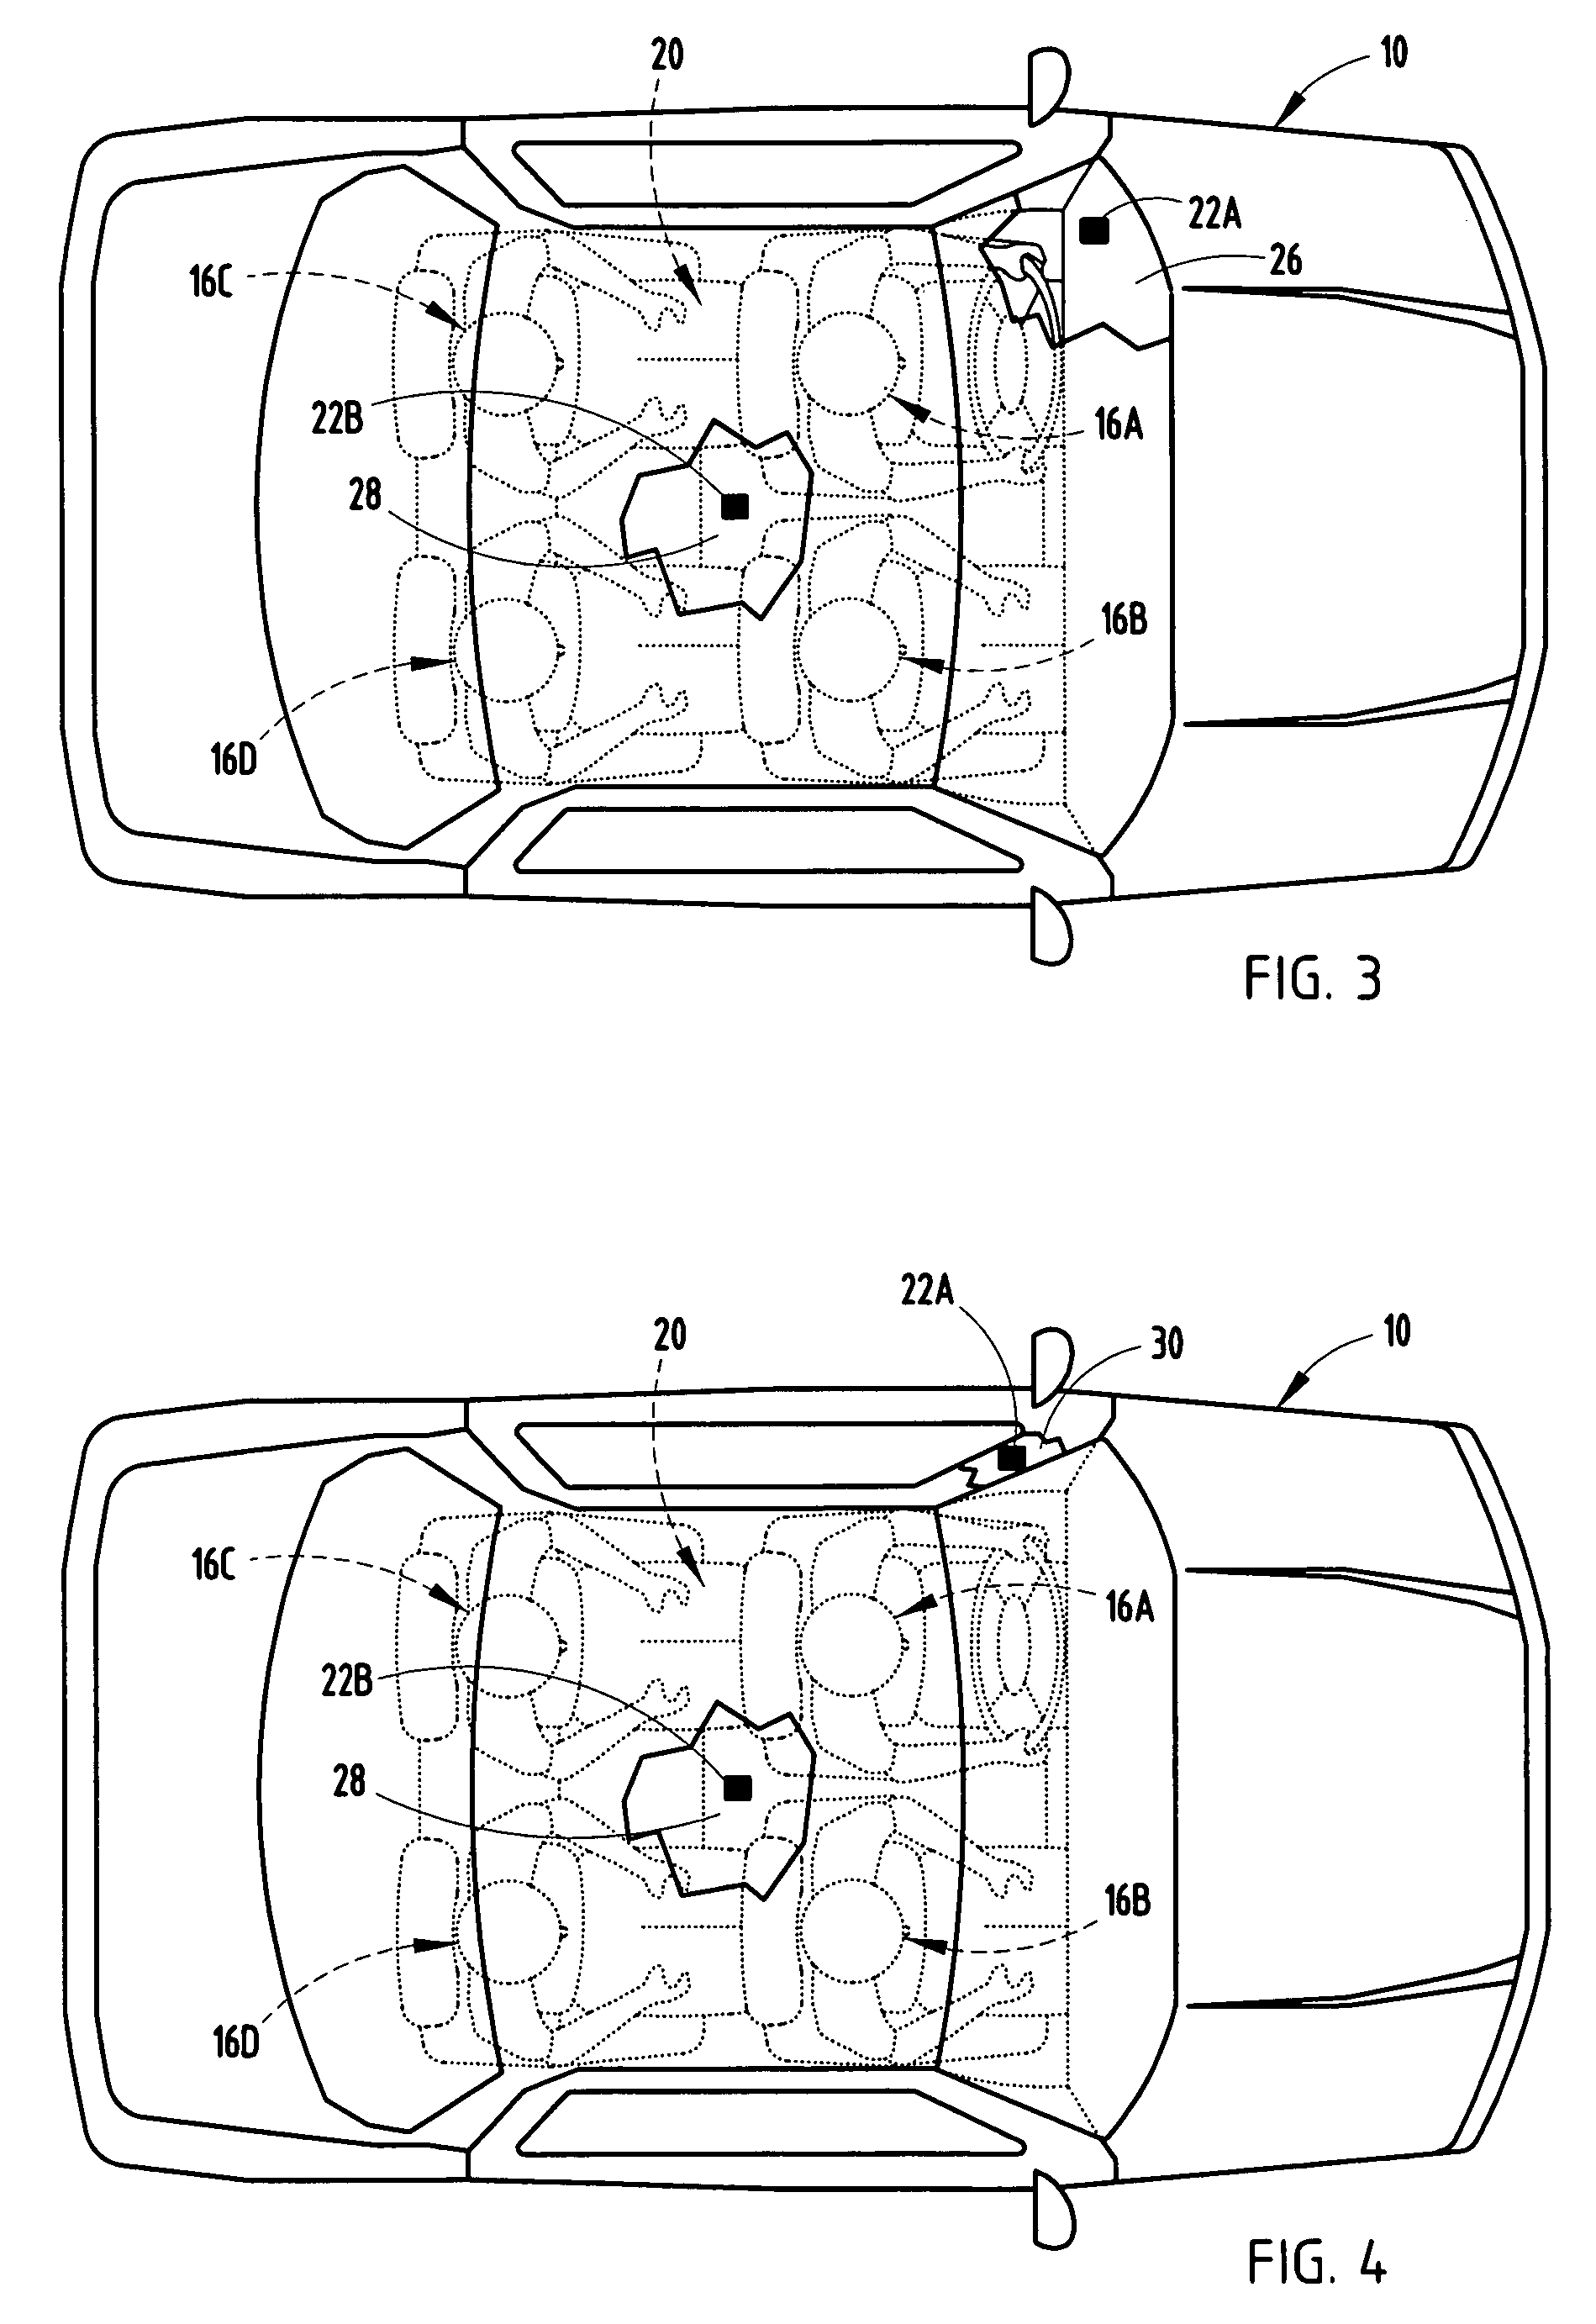 Vehicle RF device detection system and method